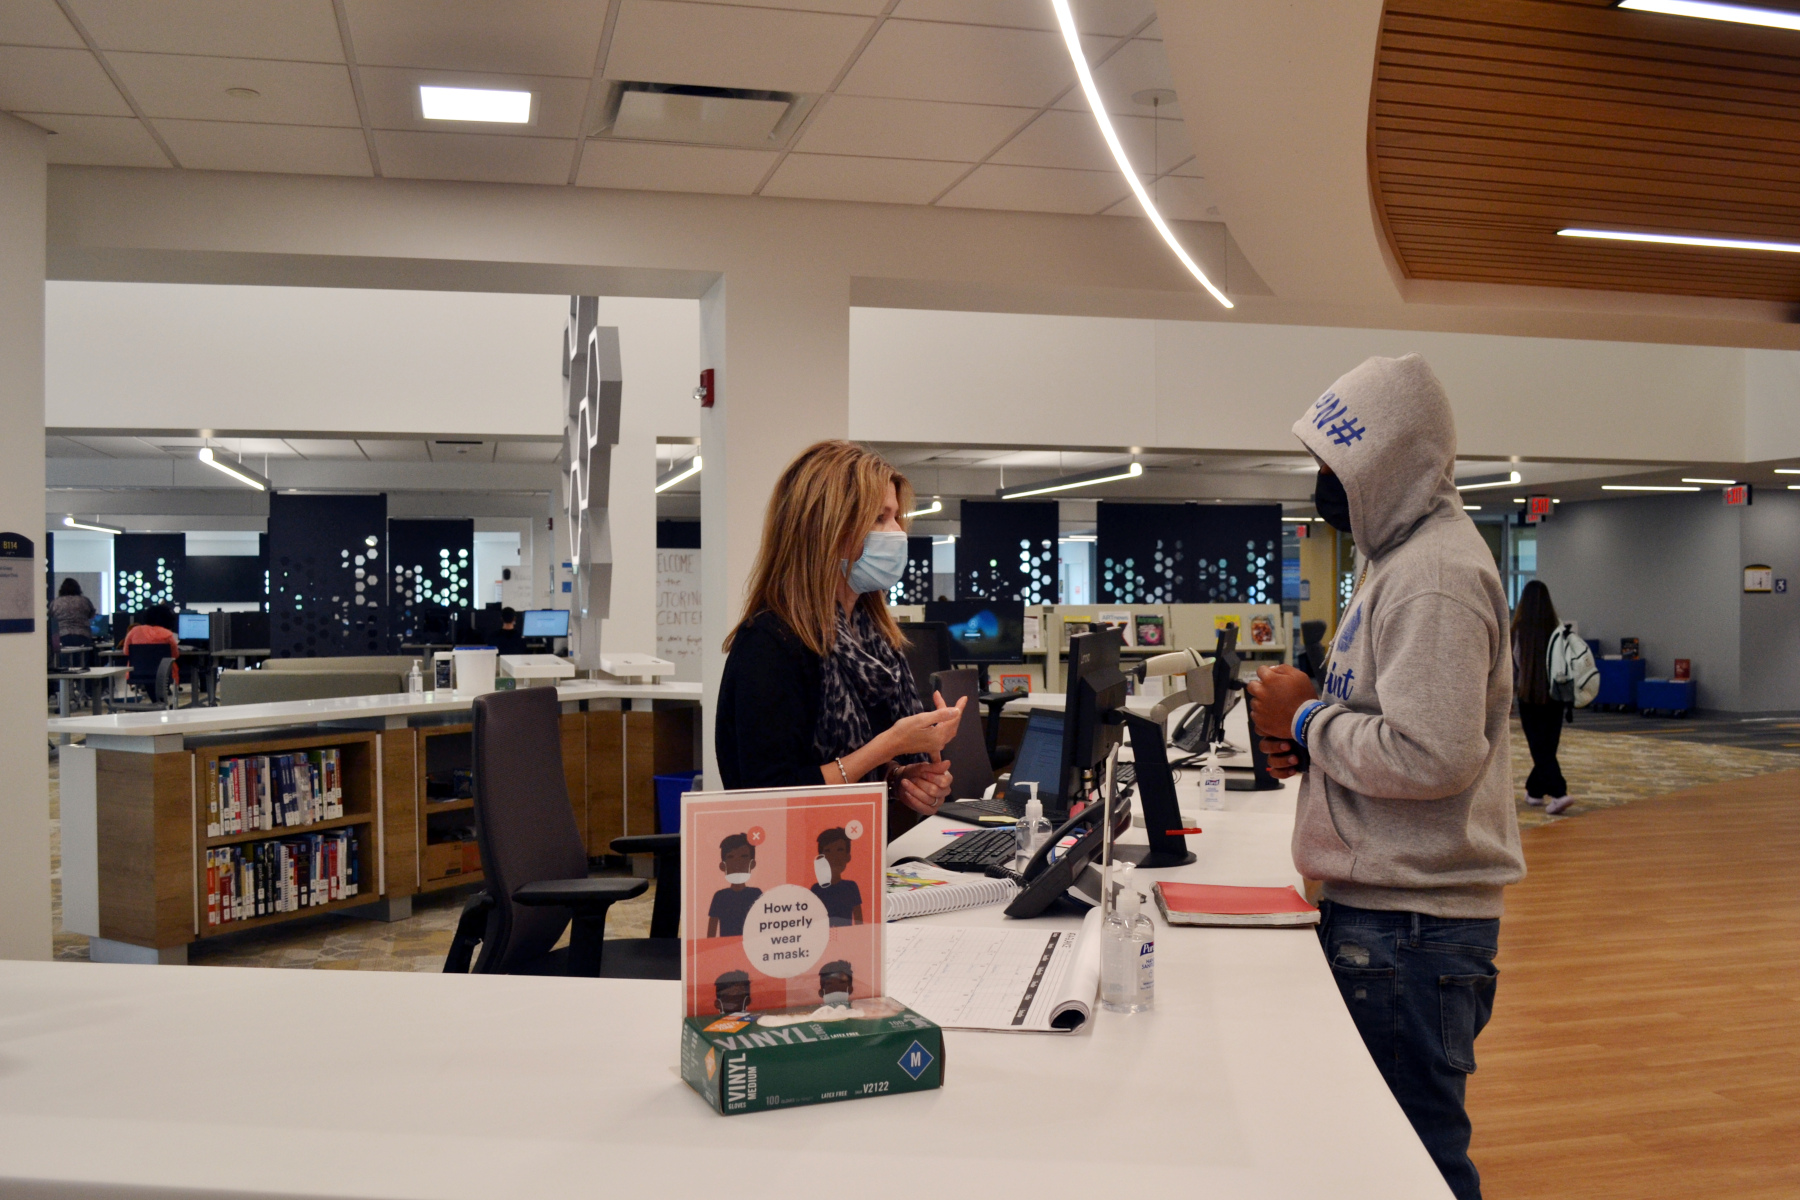 Librarian assisting student standing at reference desk